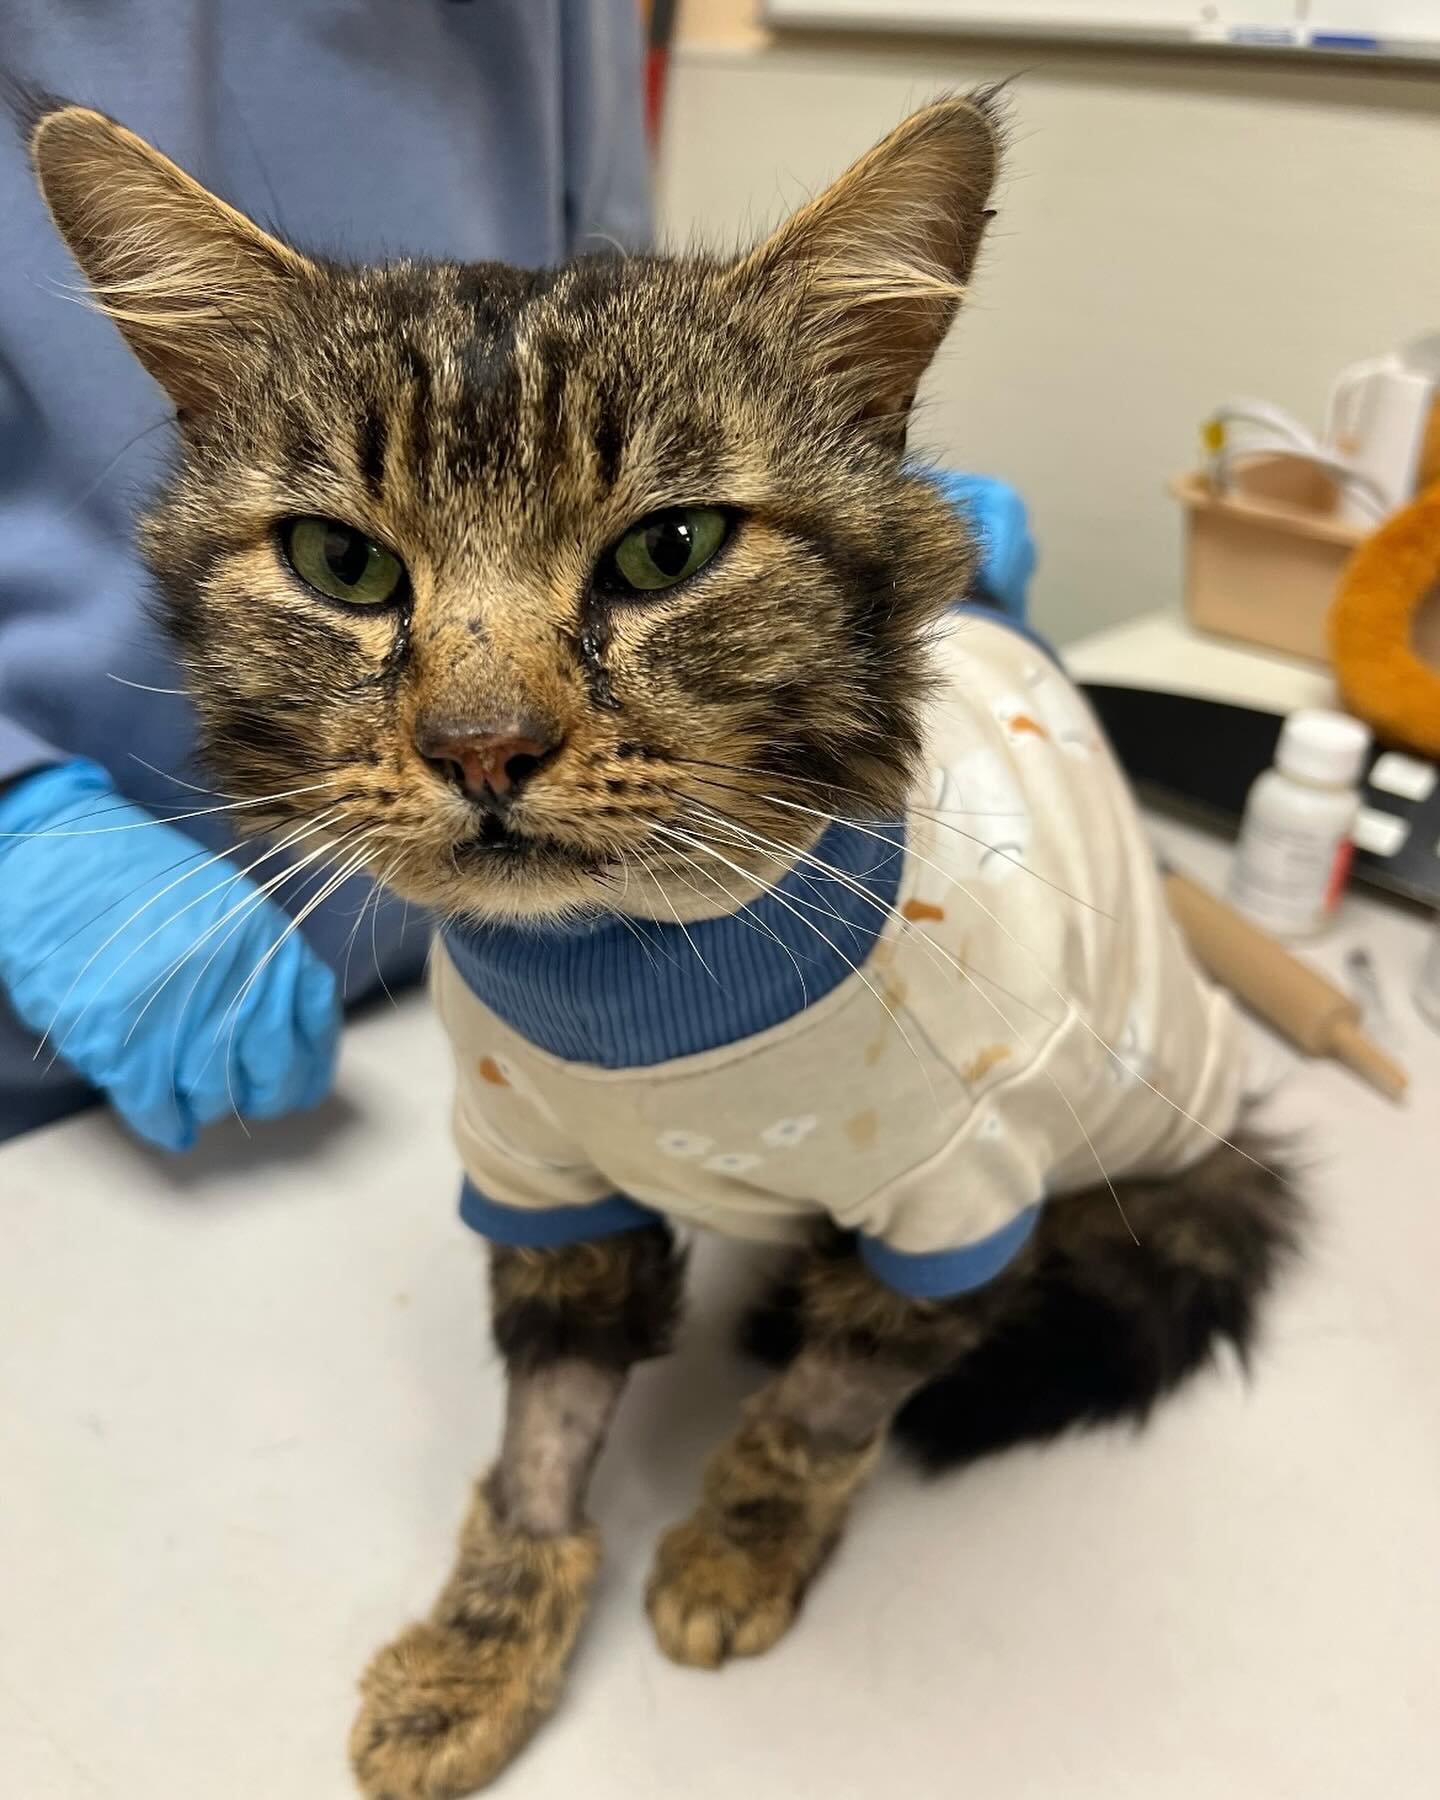 This is Romeo, one of our newer kitties brought in by our TNR team. Just days after being in the shelter, Romeo became sick; he was open-mouth breathing, drooling, and running a fever. After receiving veterinary care, it was suspected that he had fel